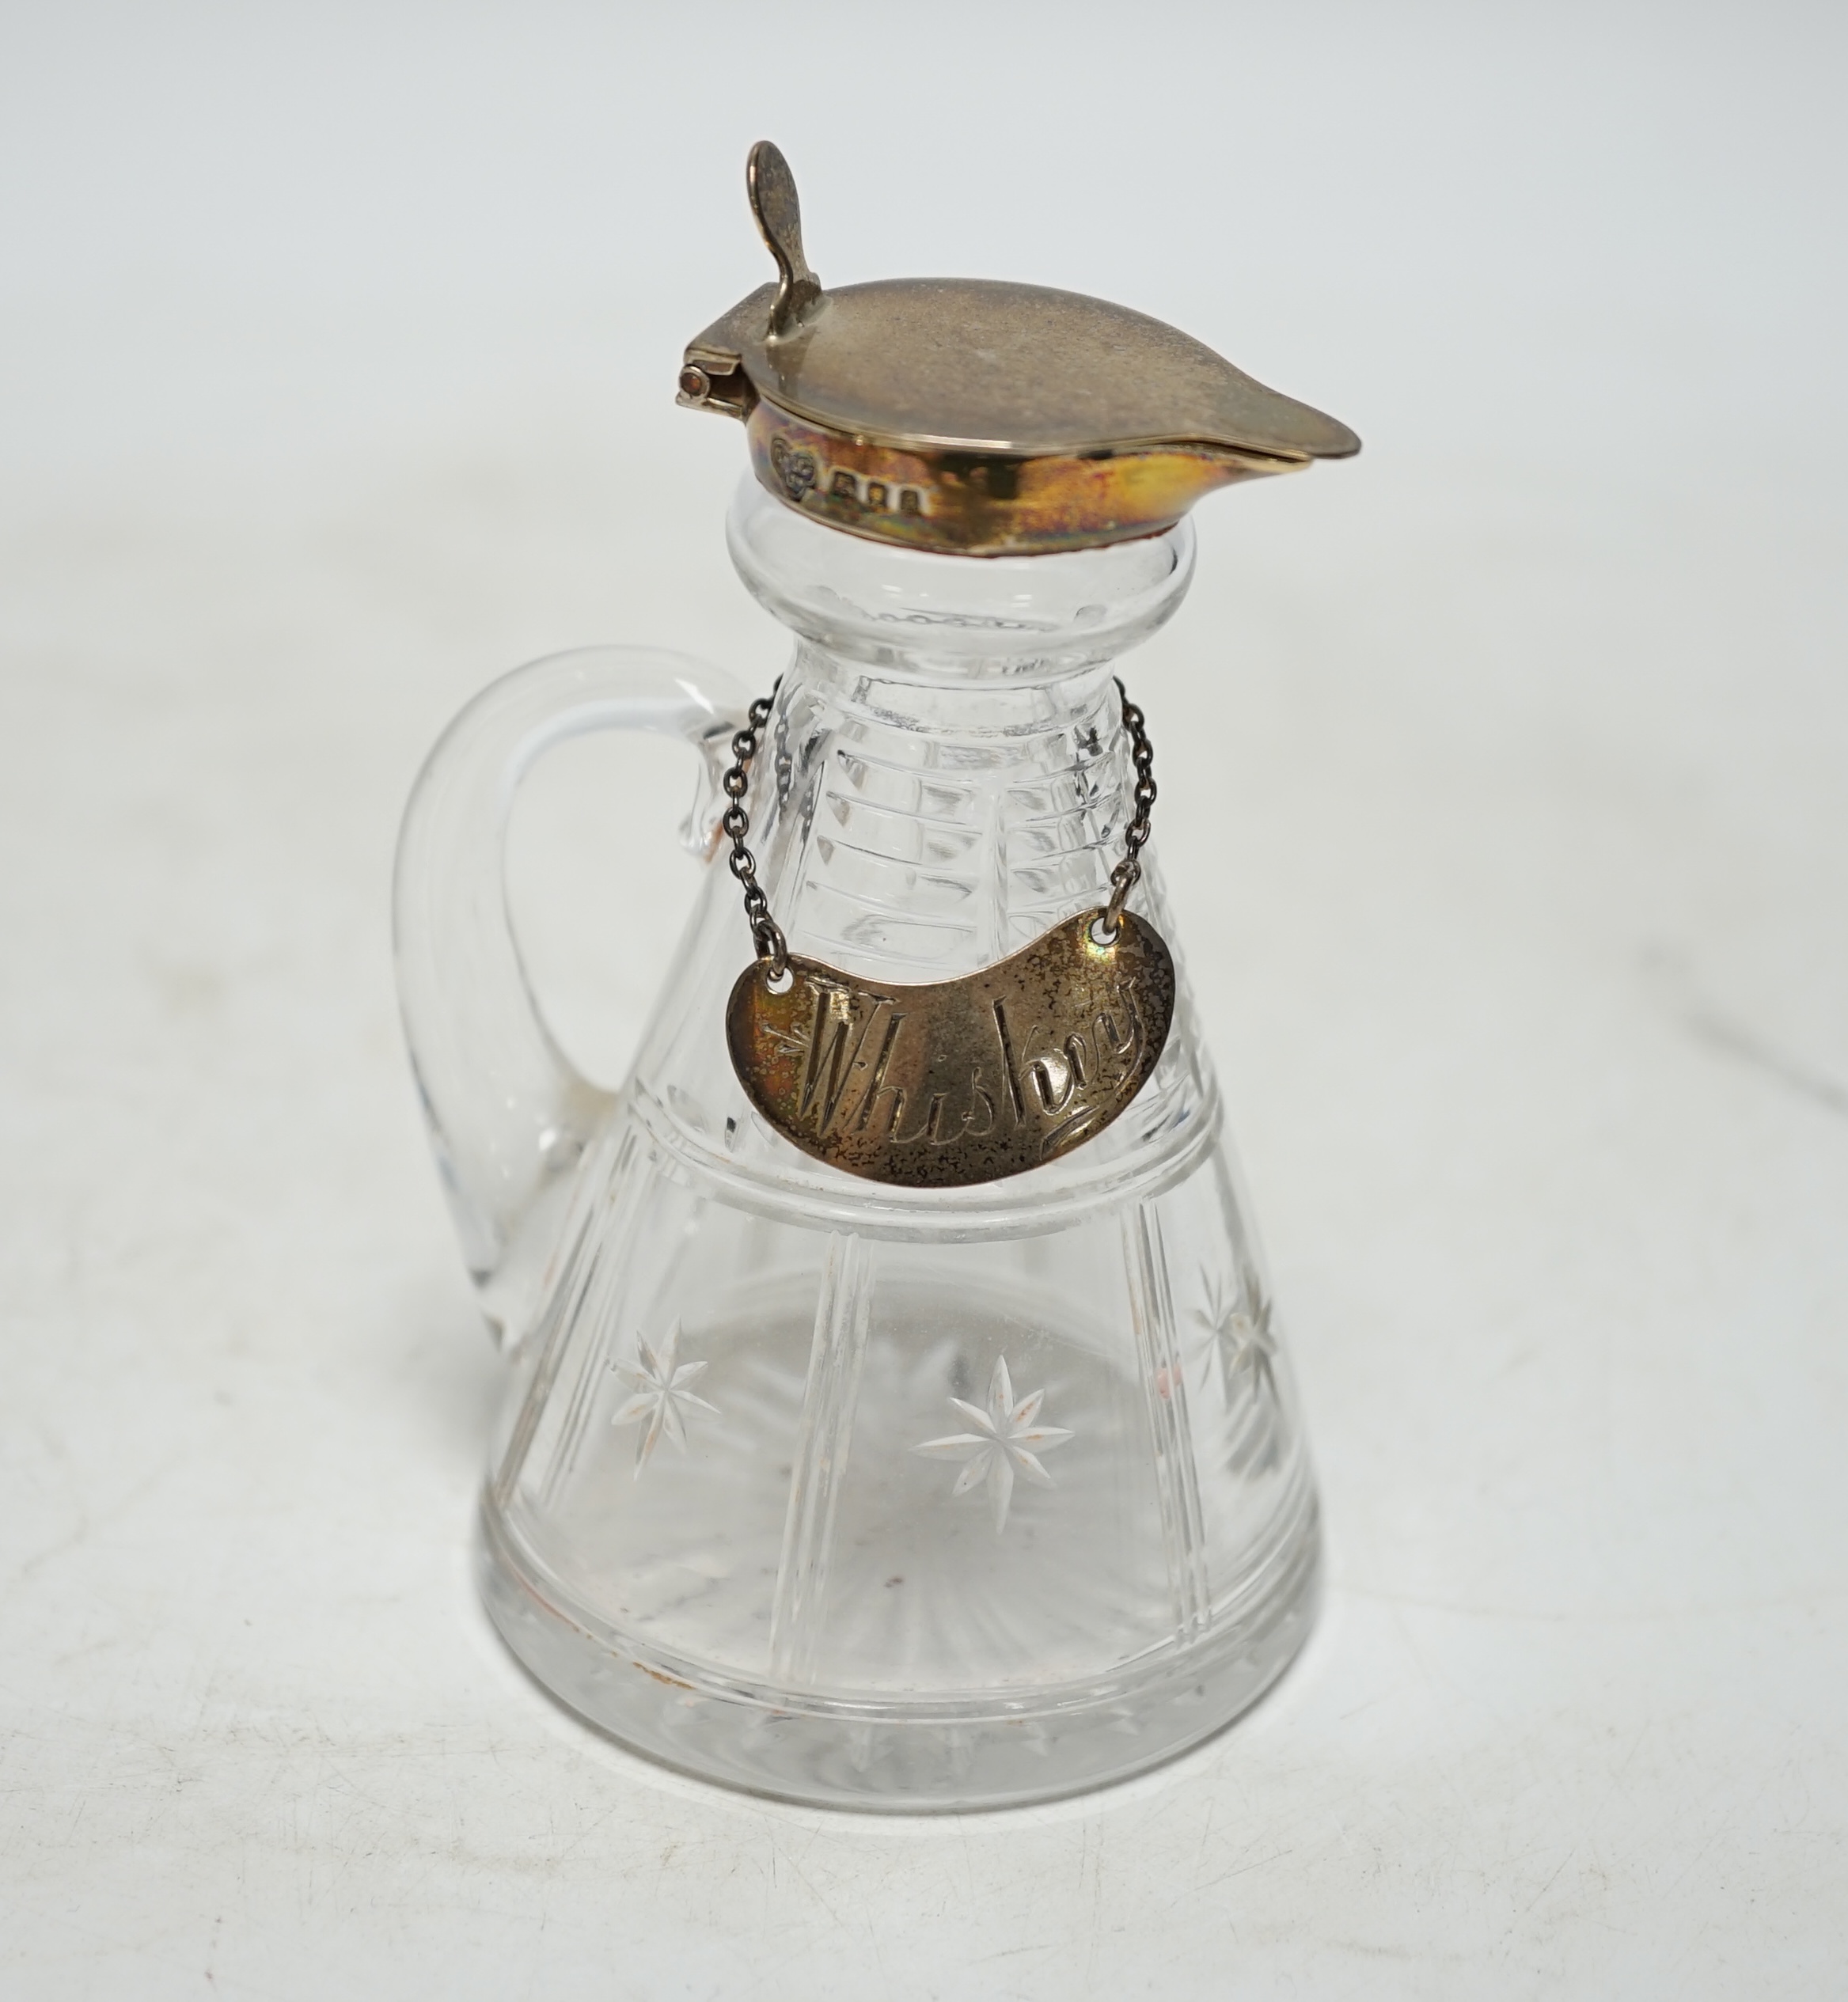 A George V silver mounted cut glass whisky noggin, Goldsmiths & Silversmiths Co Ltd, London, 1933, 10.9cm, with an Edwardian silver 'Whisky' wine label. Condition - poor